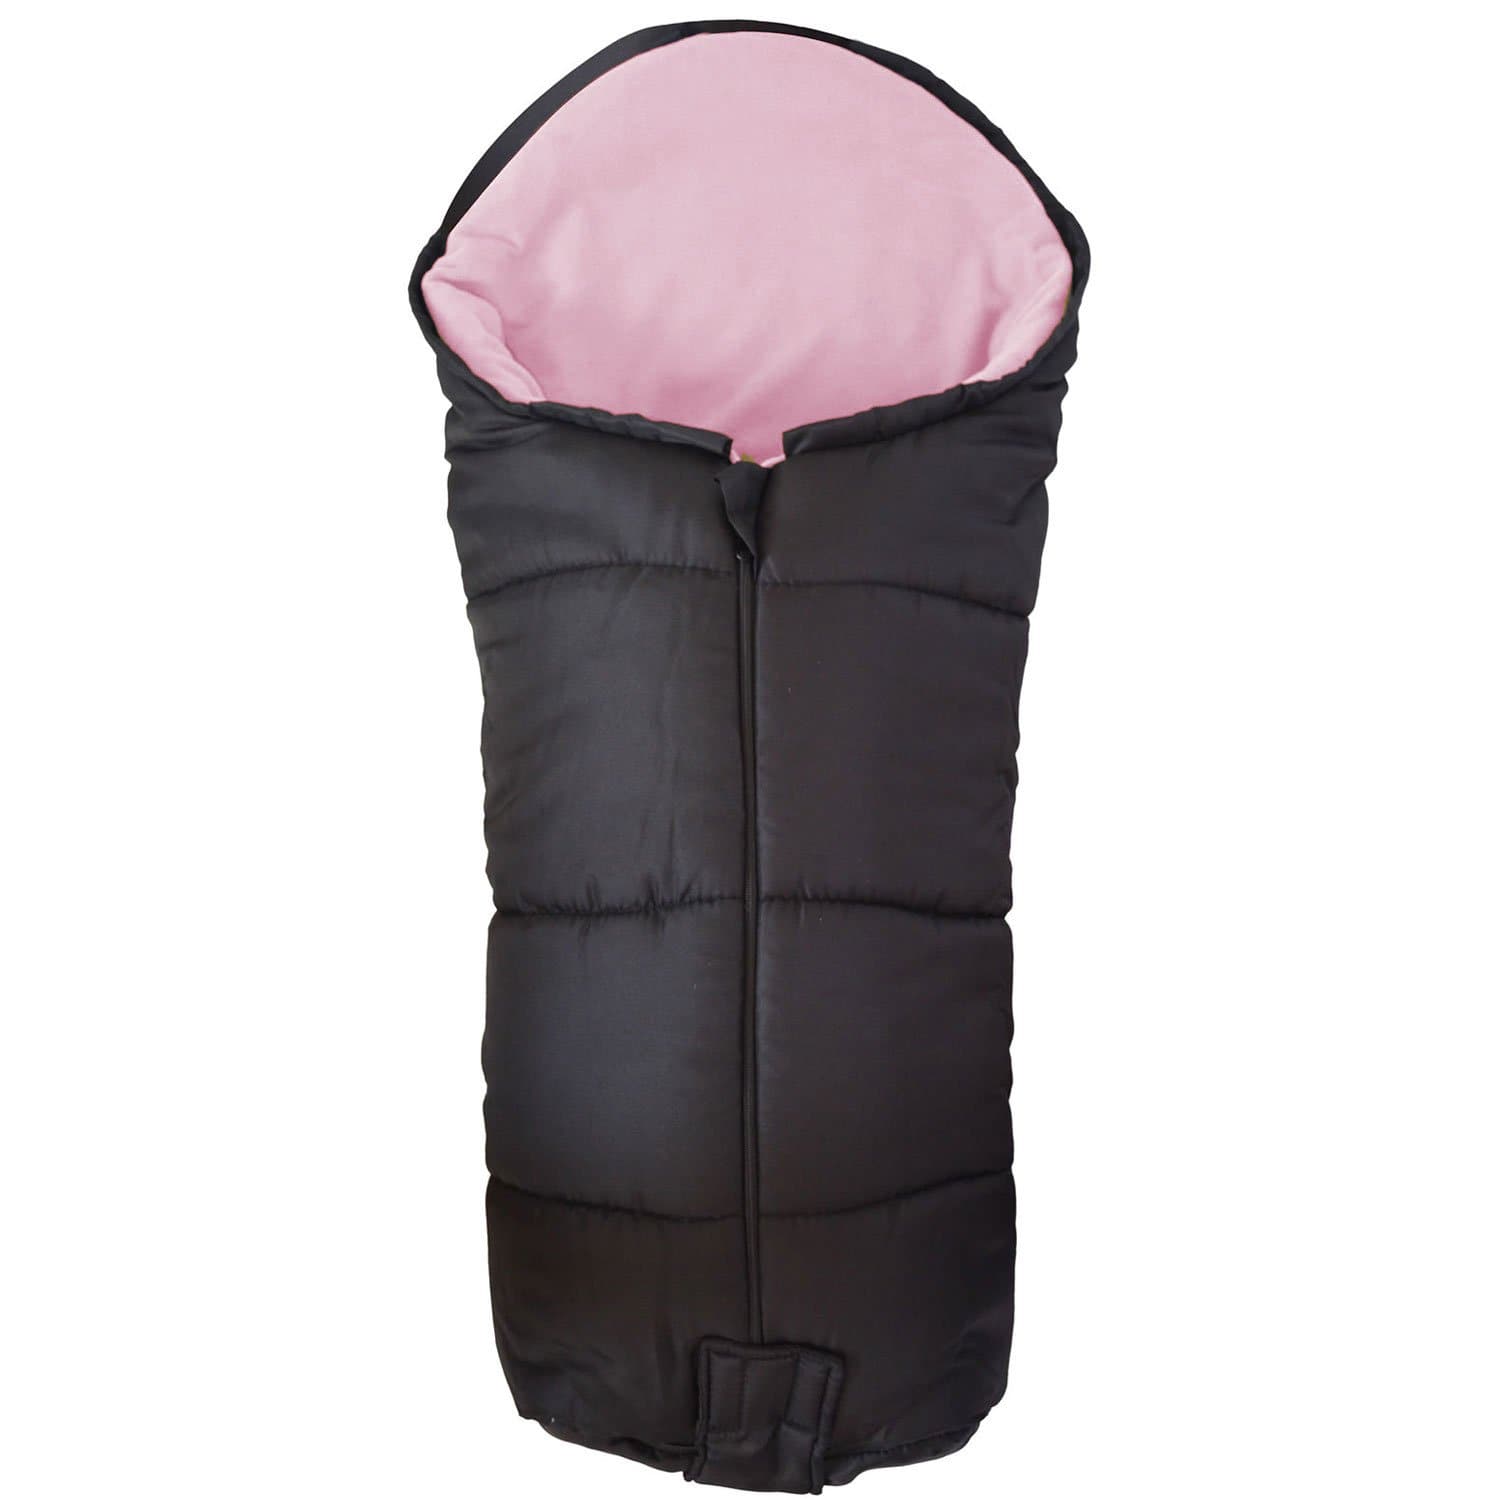 Deluxe Footmuff / Cosy Toes Compatible with Babylo - Light Pink / Fits All Models | For Your Little One